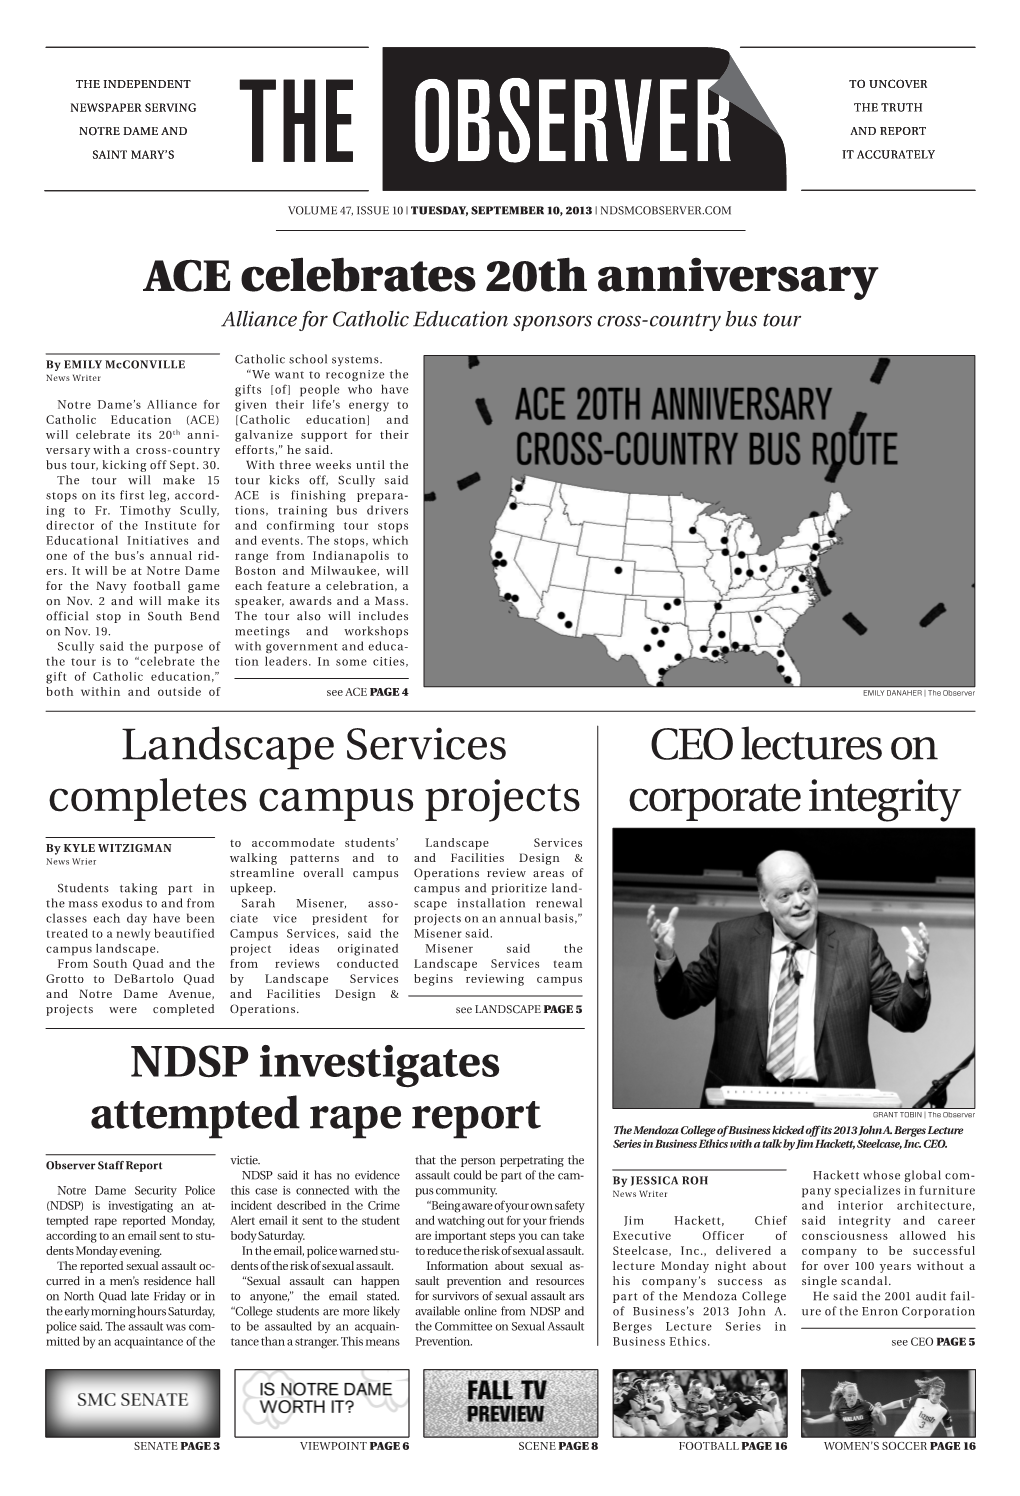 ACE Celebrates 20Th Anniversary Landscape Services Completes Campus Projects NDSP Investigates Attempted Rape Report Ceo Lecture